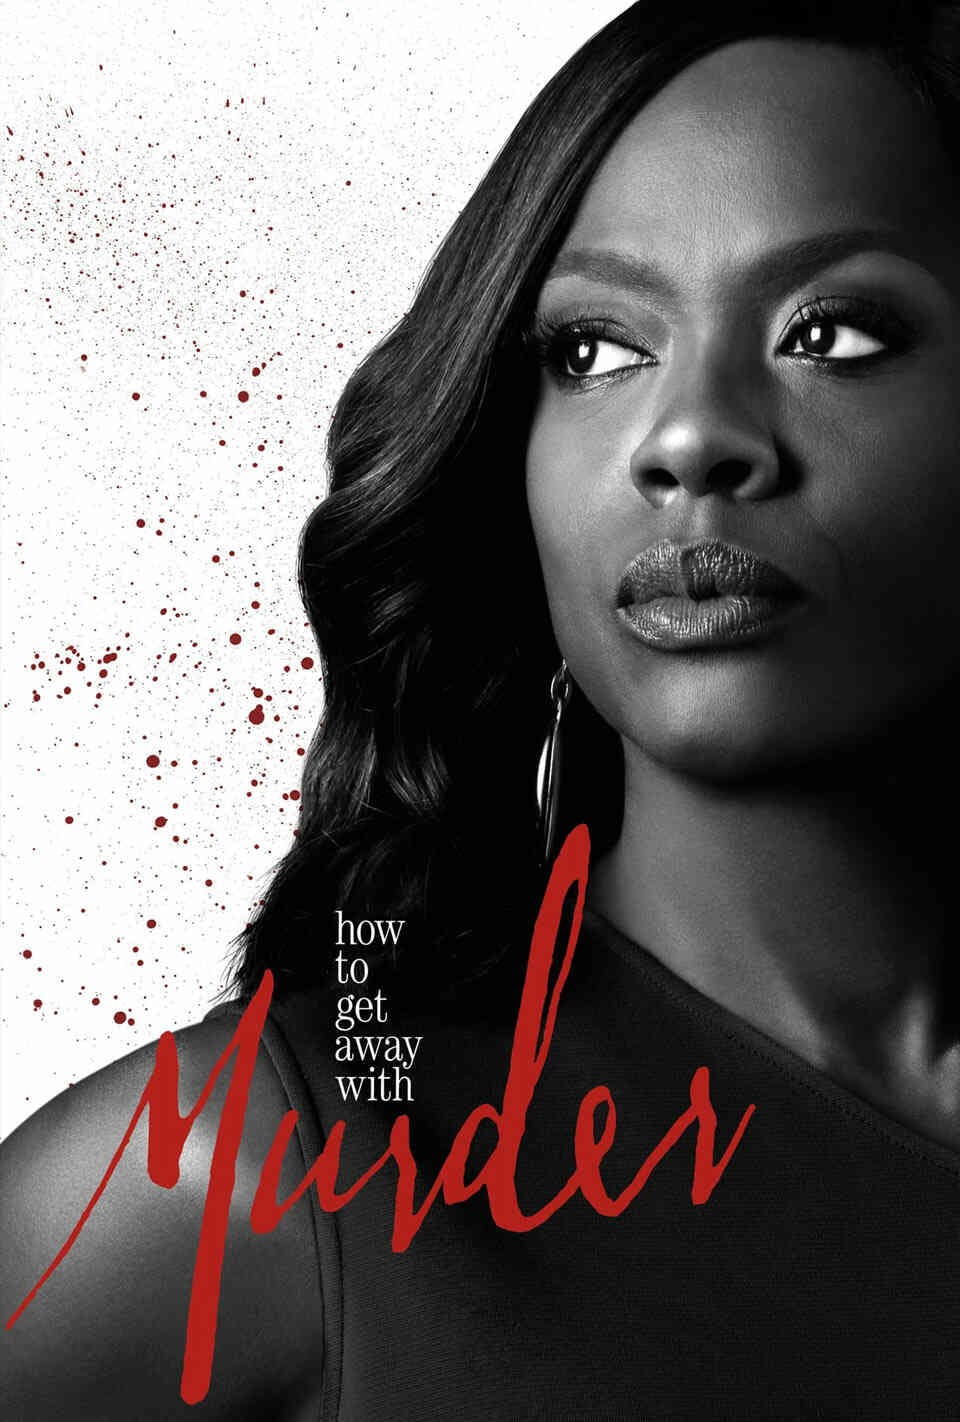 Read How to Get Away with Murder screenplay (poster)